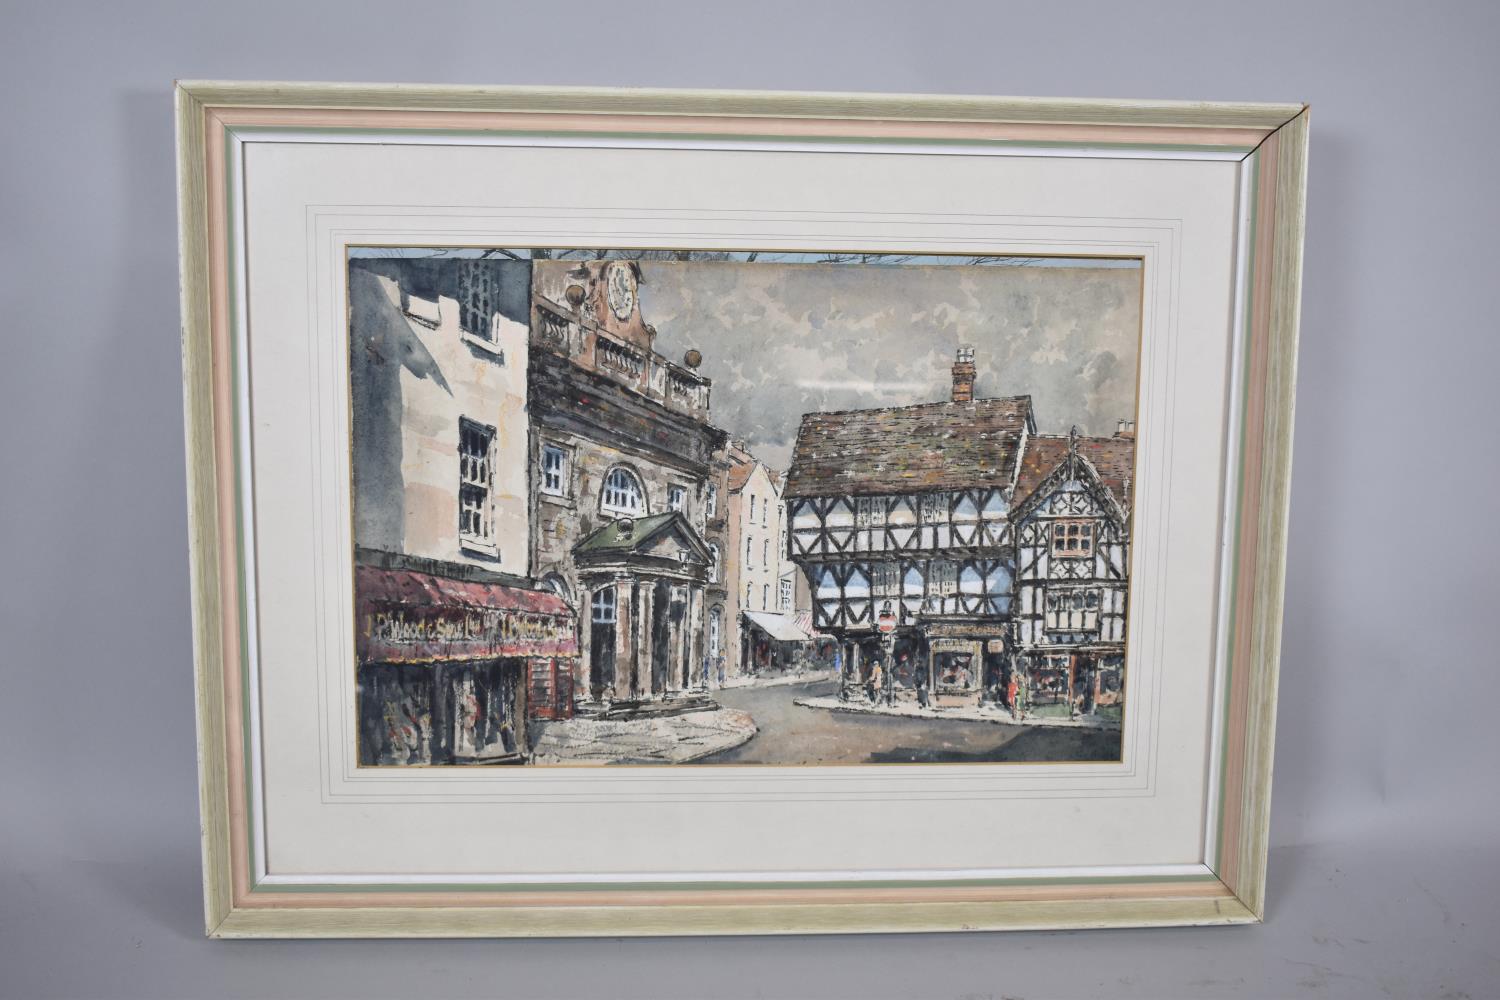 A Framed Print of the Butter Cross, Ludlow (Over Another), 56x37cm